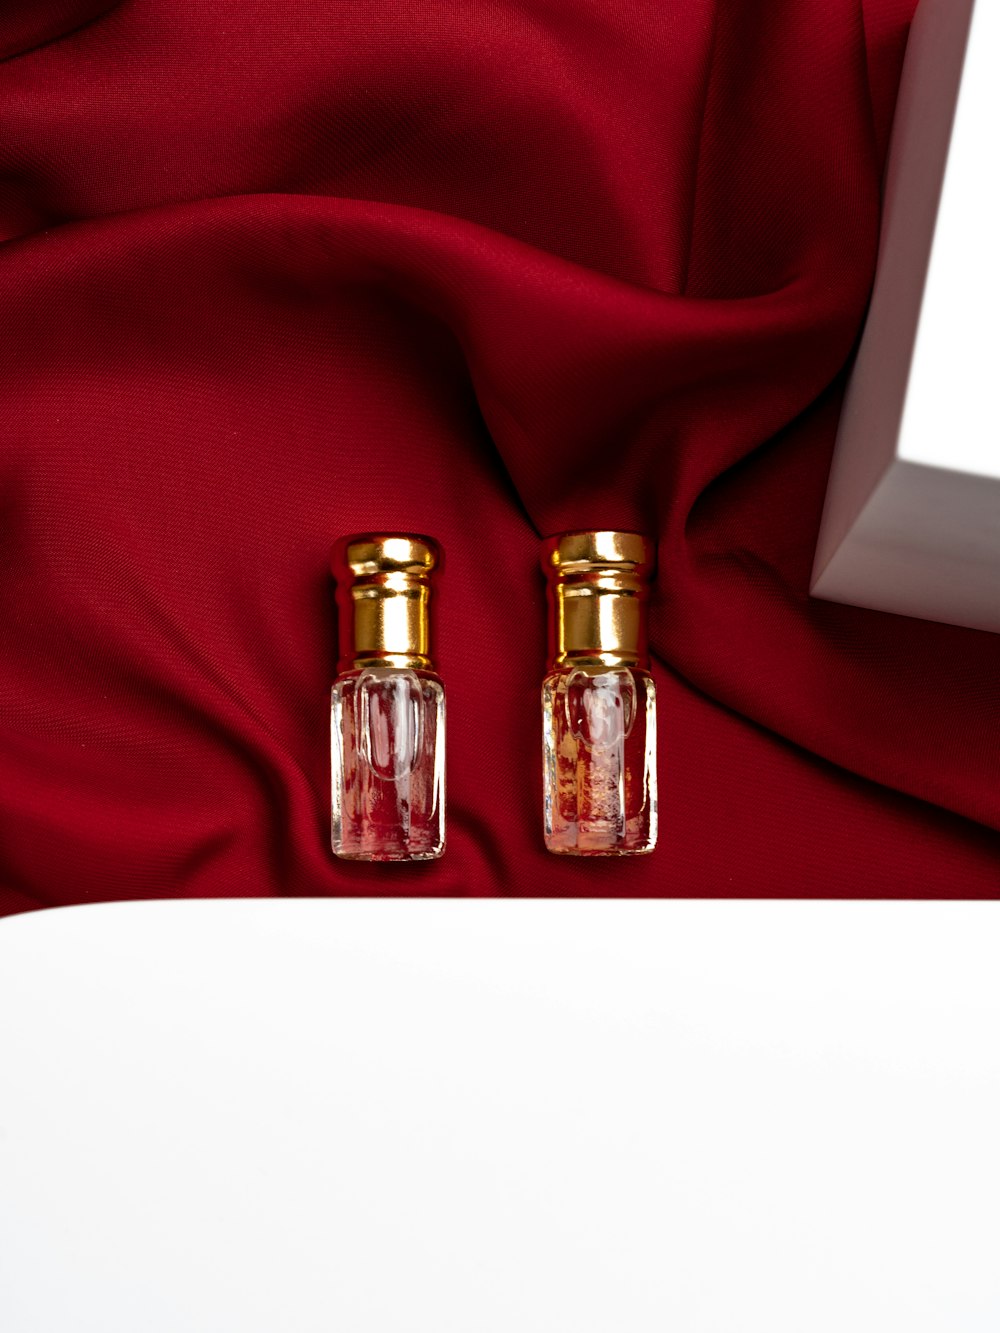 two bottles of perfume sitting on a red cloth